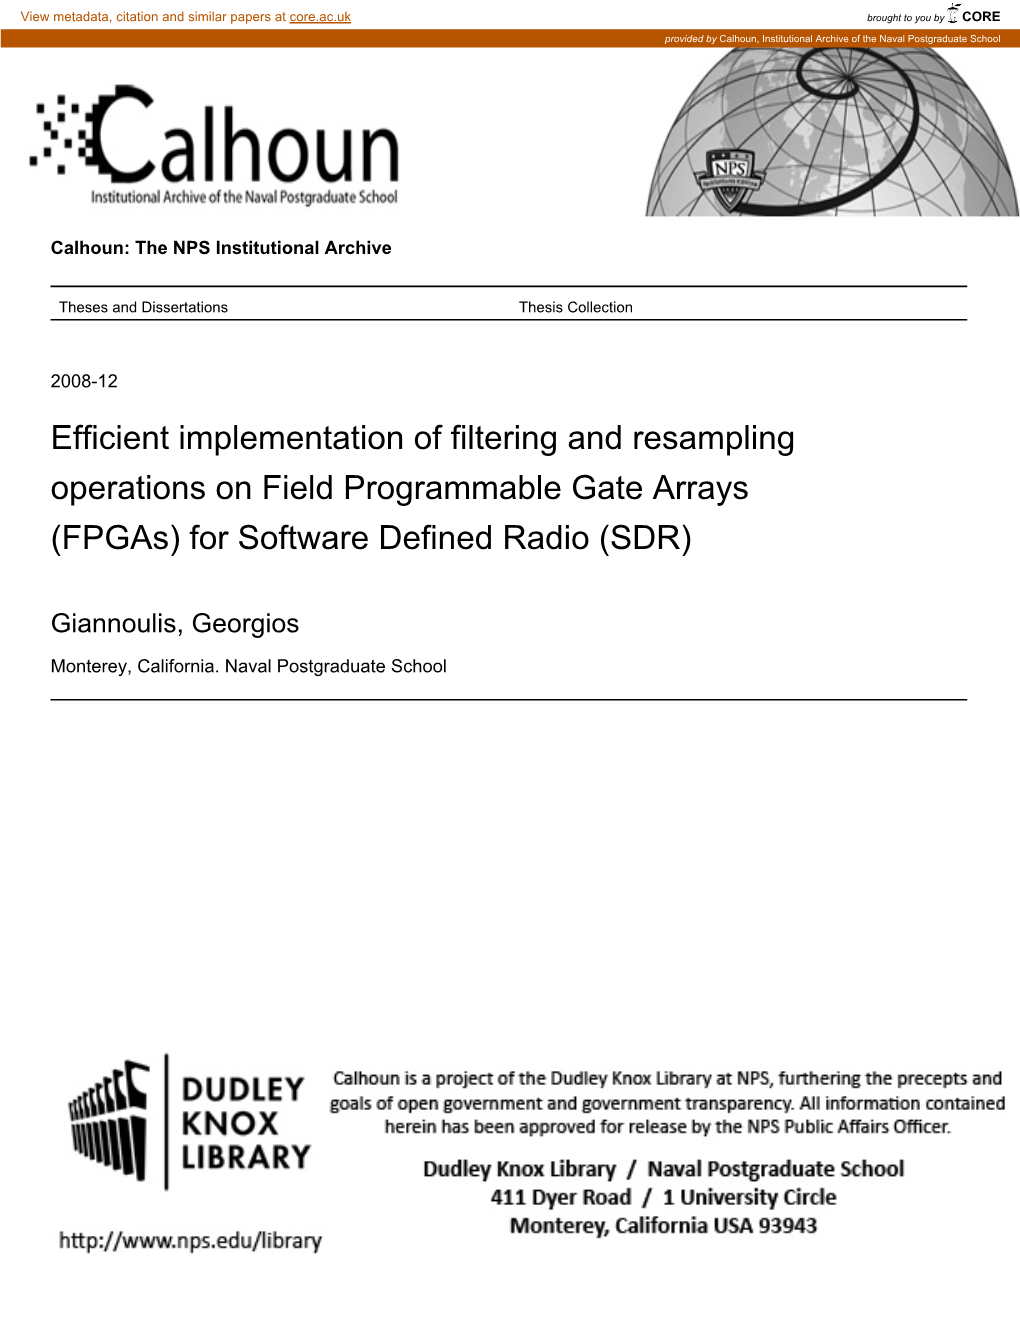 Efficient Implementation of Filtering and Resampling Operations on Field Programmable Gate Arrays (Fpgas) for Software Defined Radio (SDR)